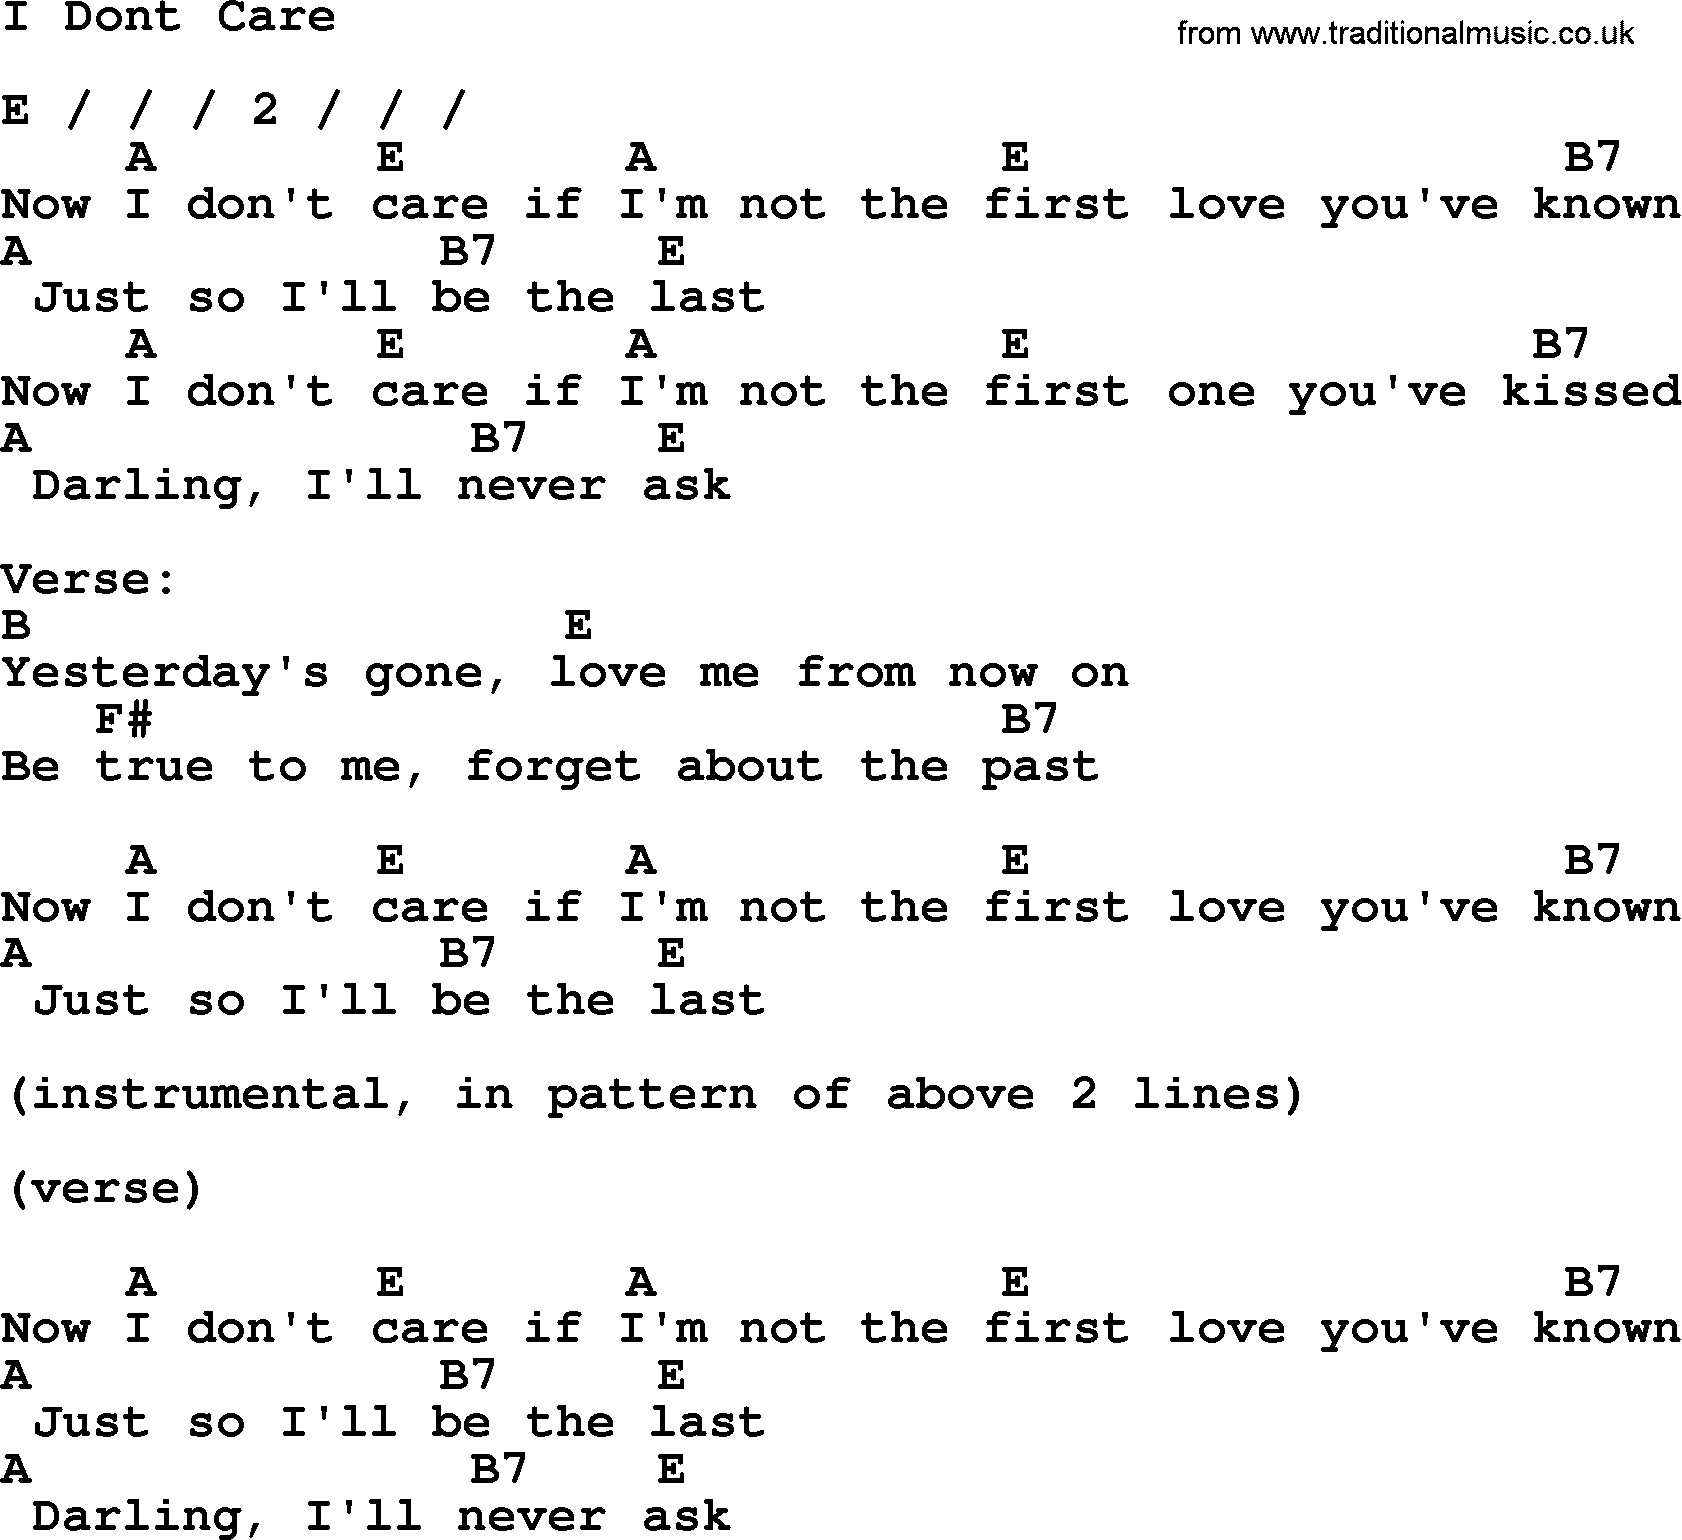 Bluegrass song: I Dont Care, lyrics and chords